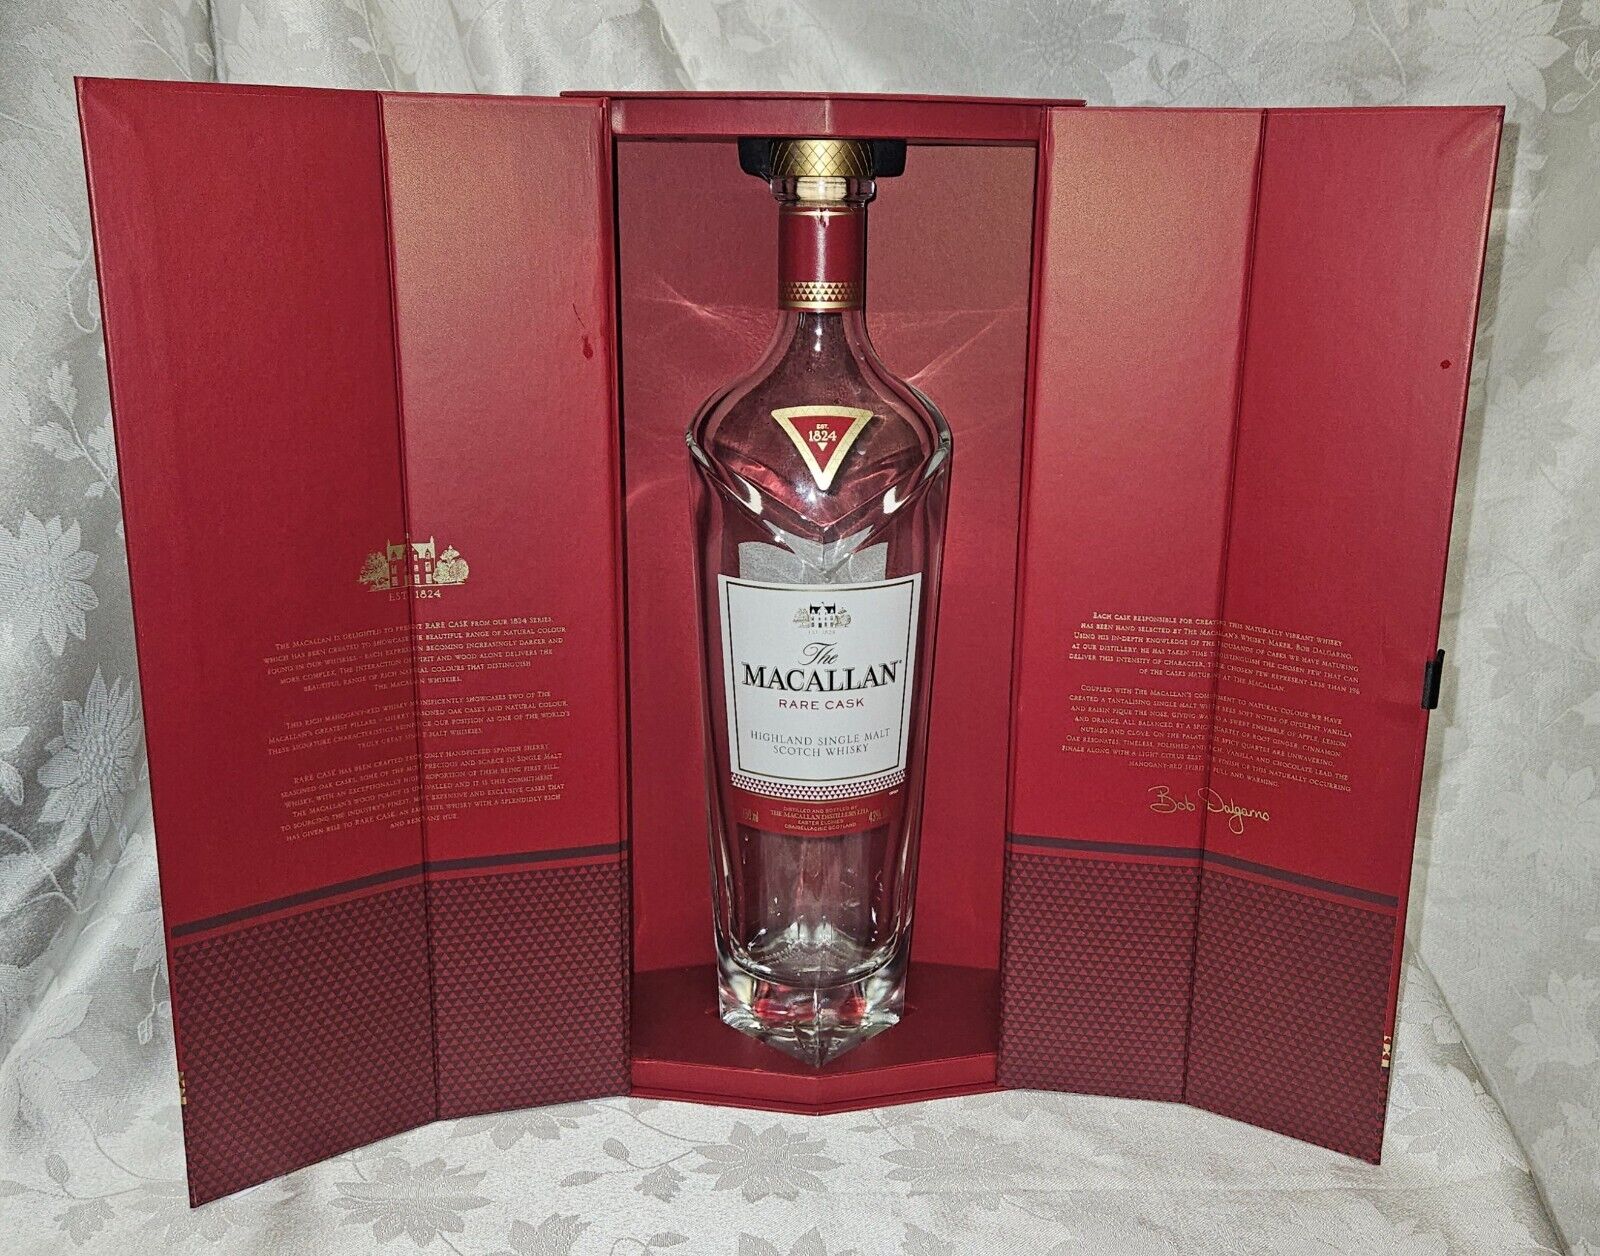 Macallan Rare Cask Box and Bottle Complete 🔥🔥🔥